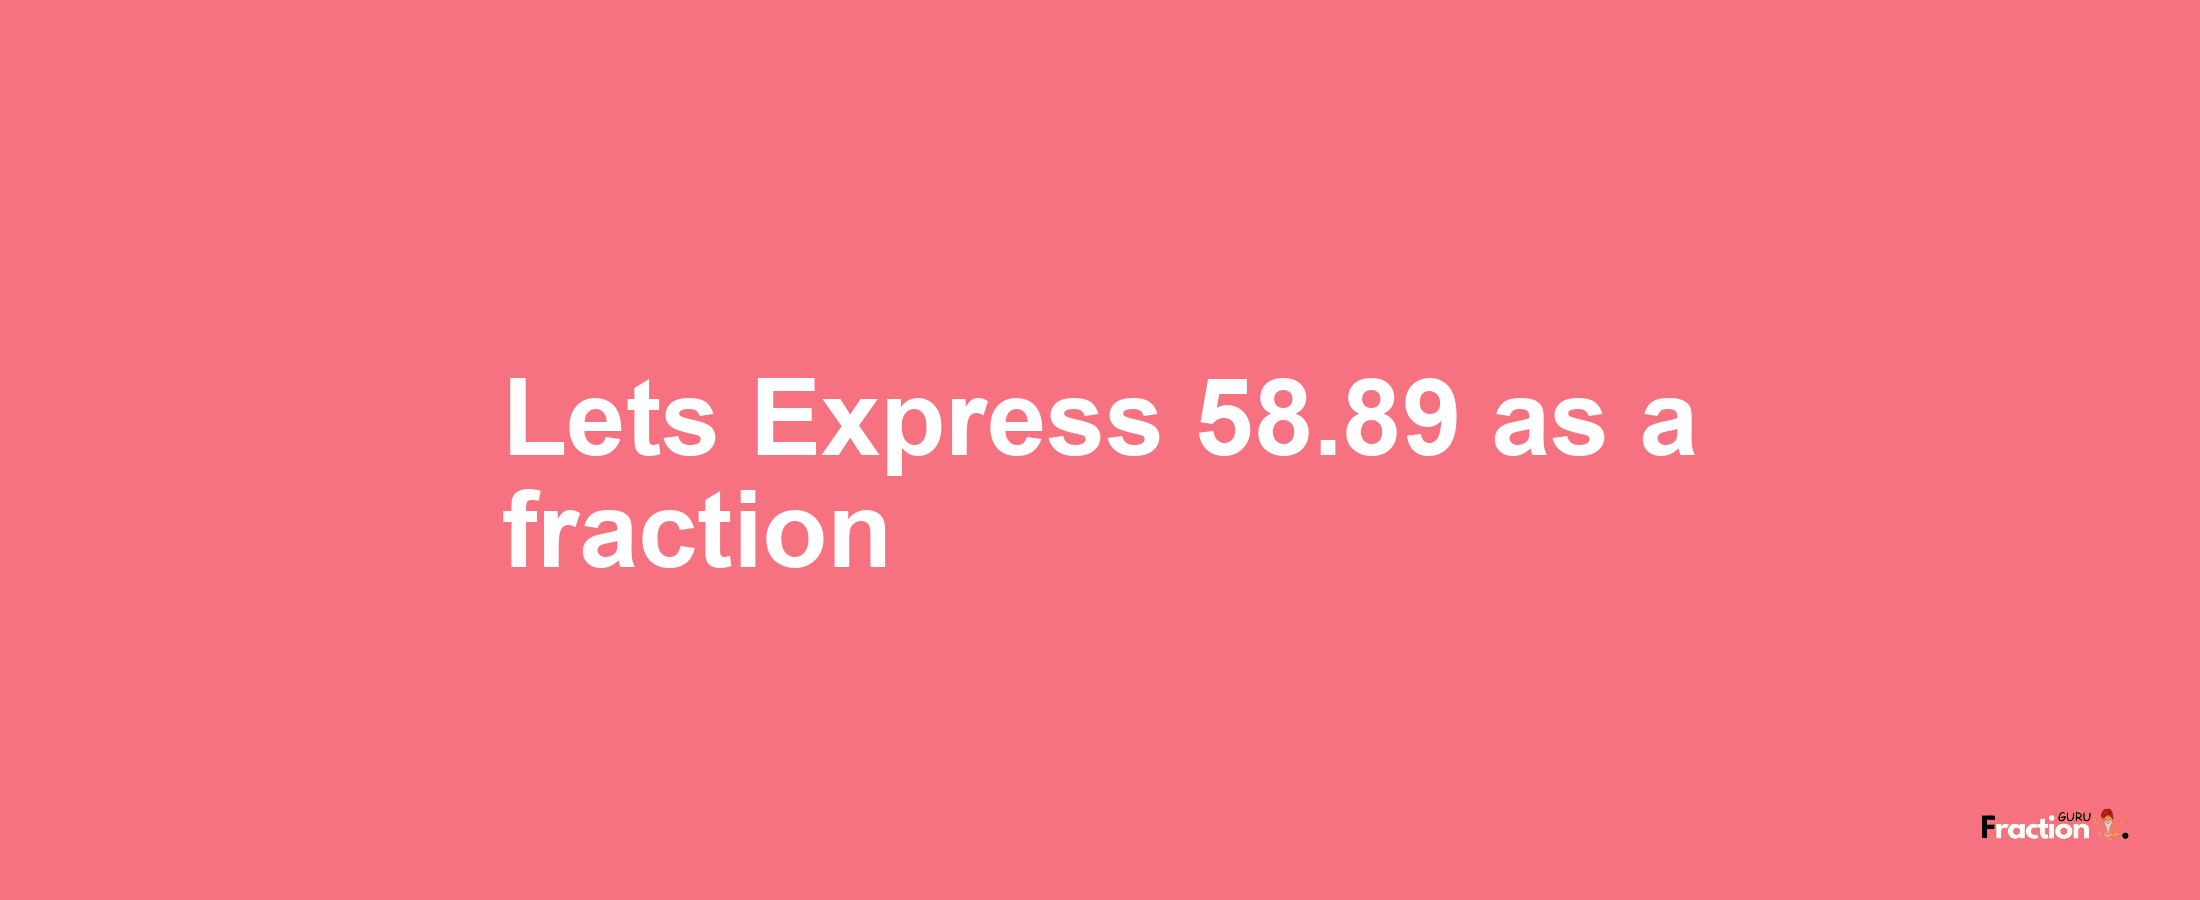 Lets Express 58.89 as afraction